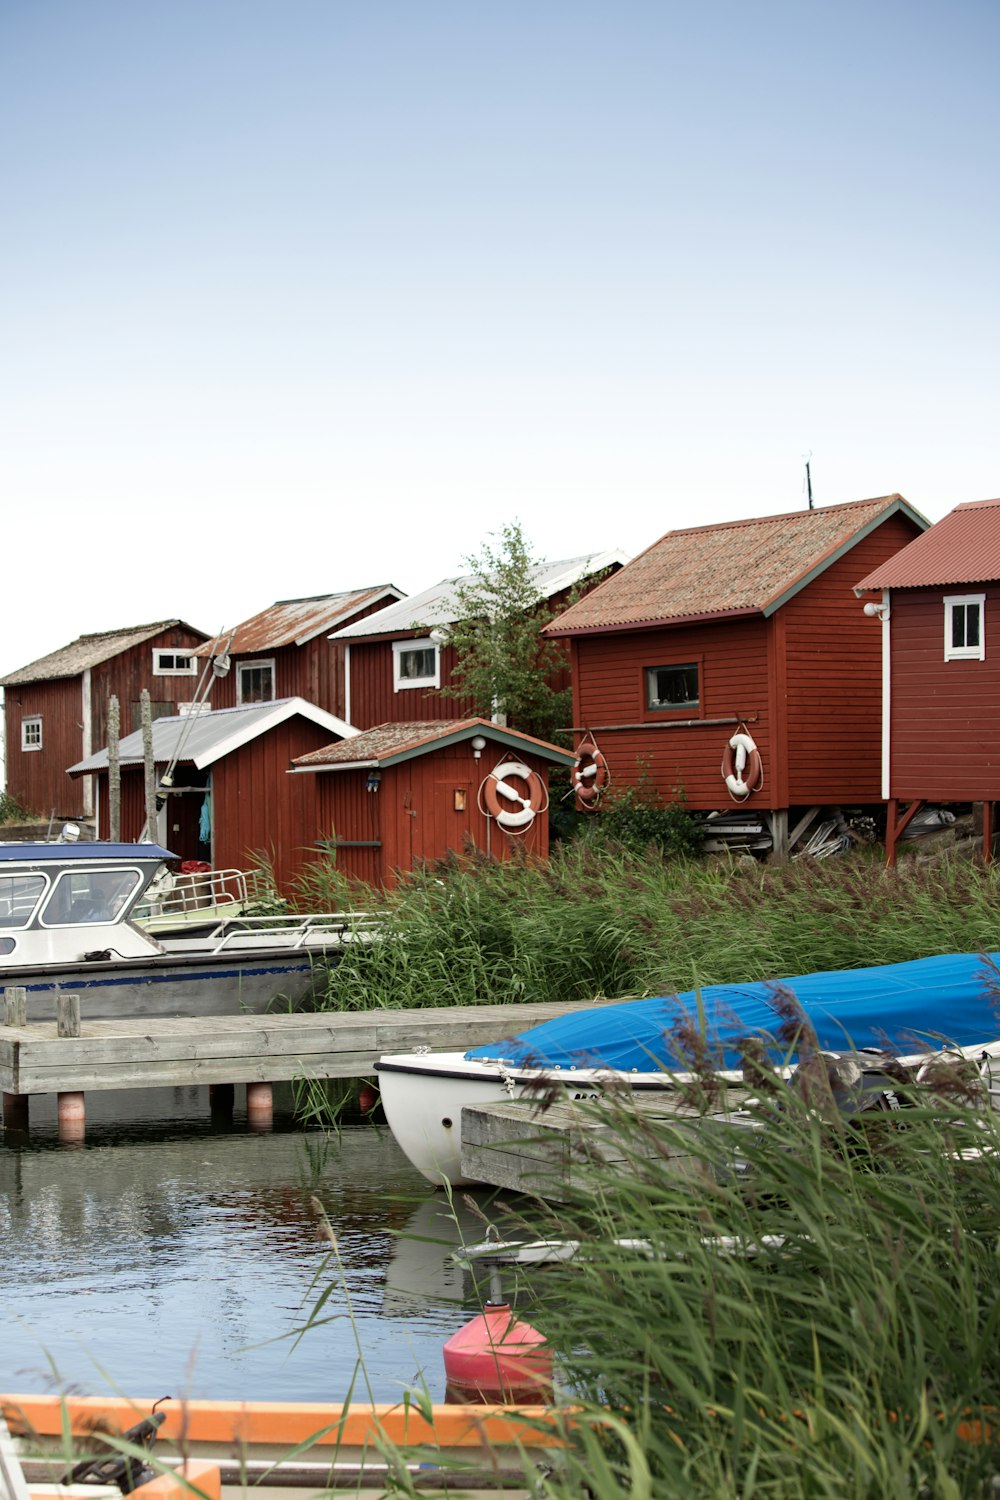 a row of red houses next to a body of water